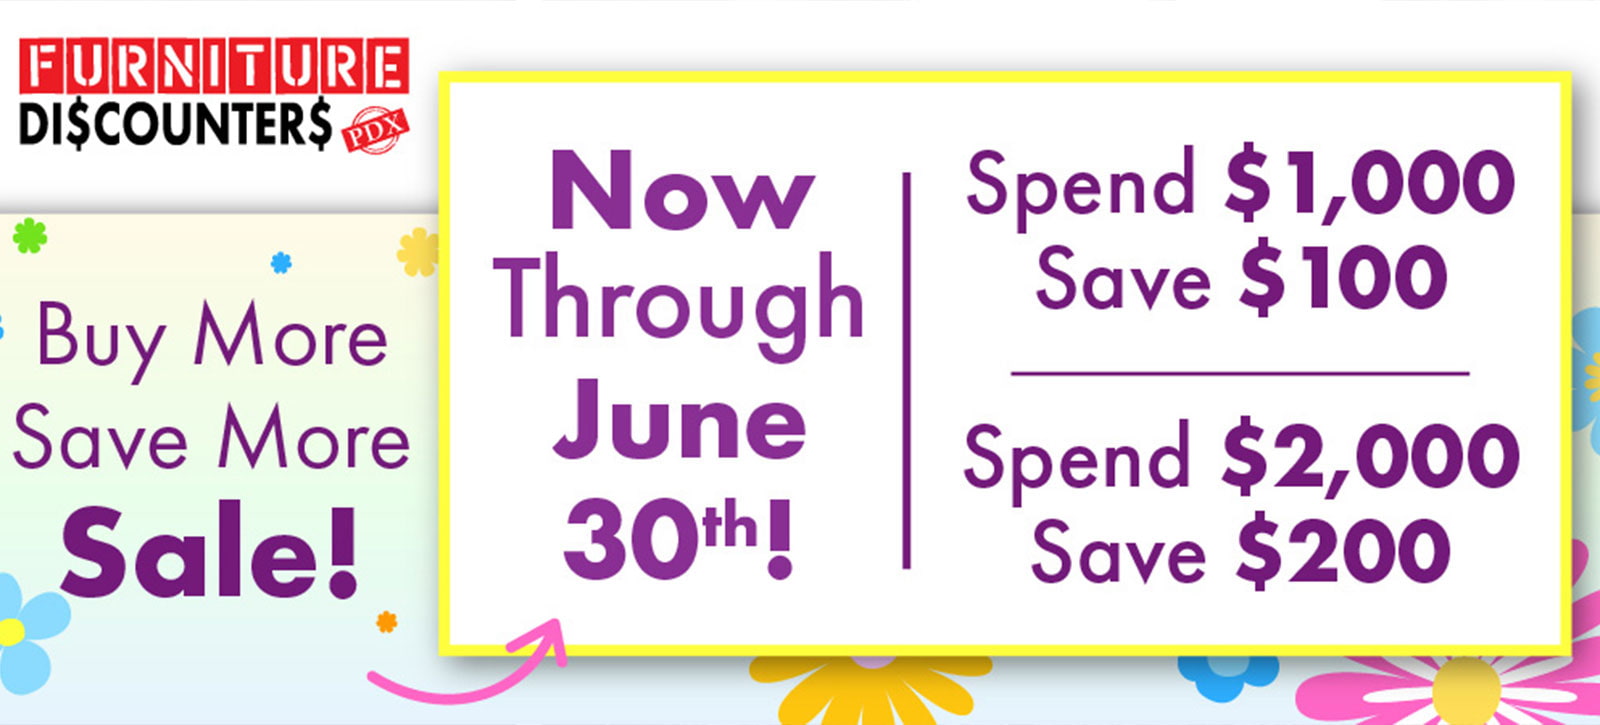 Buy More Save More Sale - Now through June 30